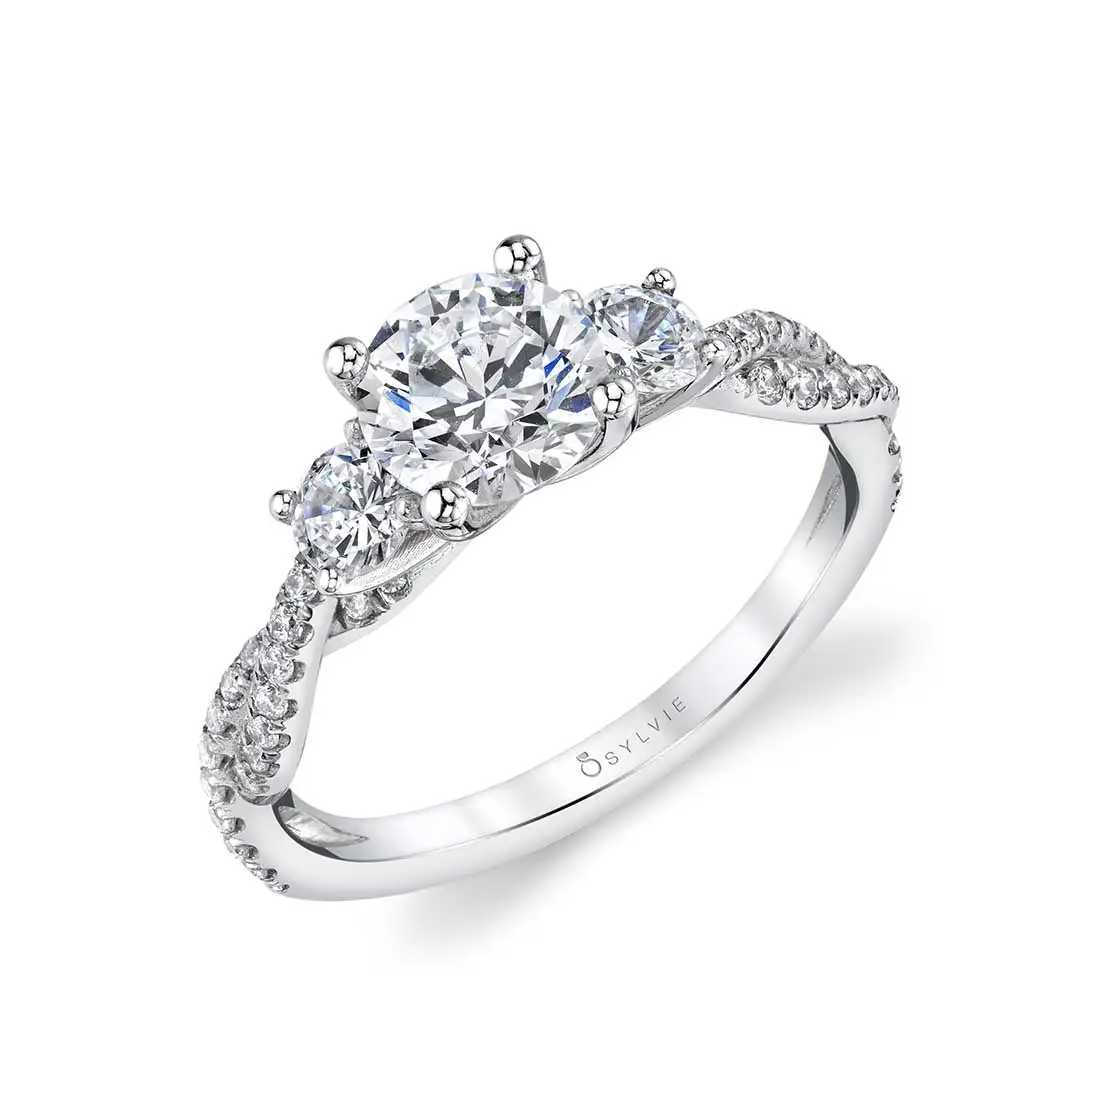 Unique Solid White Gold 6+Ct. Diamond 3-stone Engagement Ring